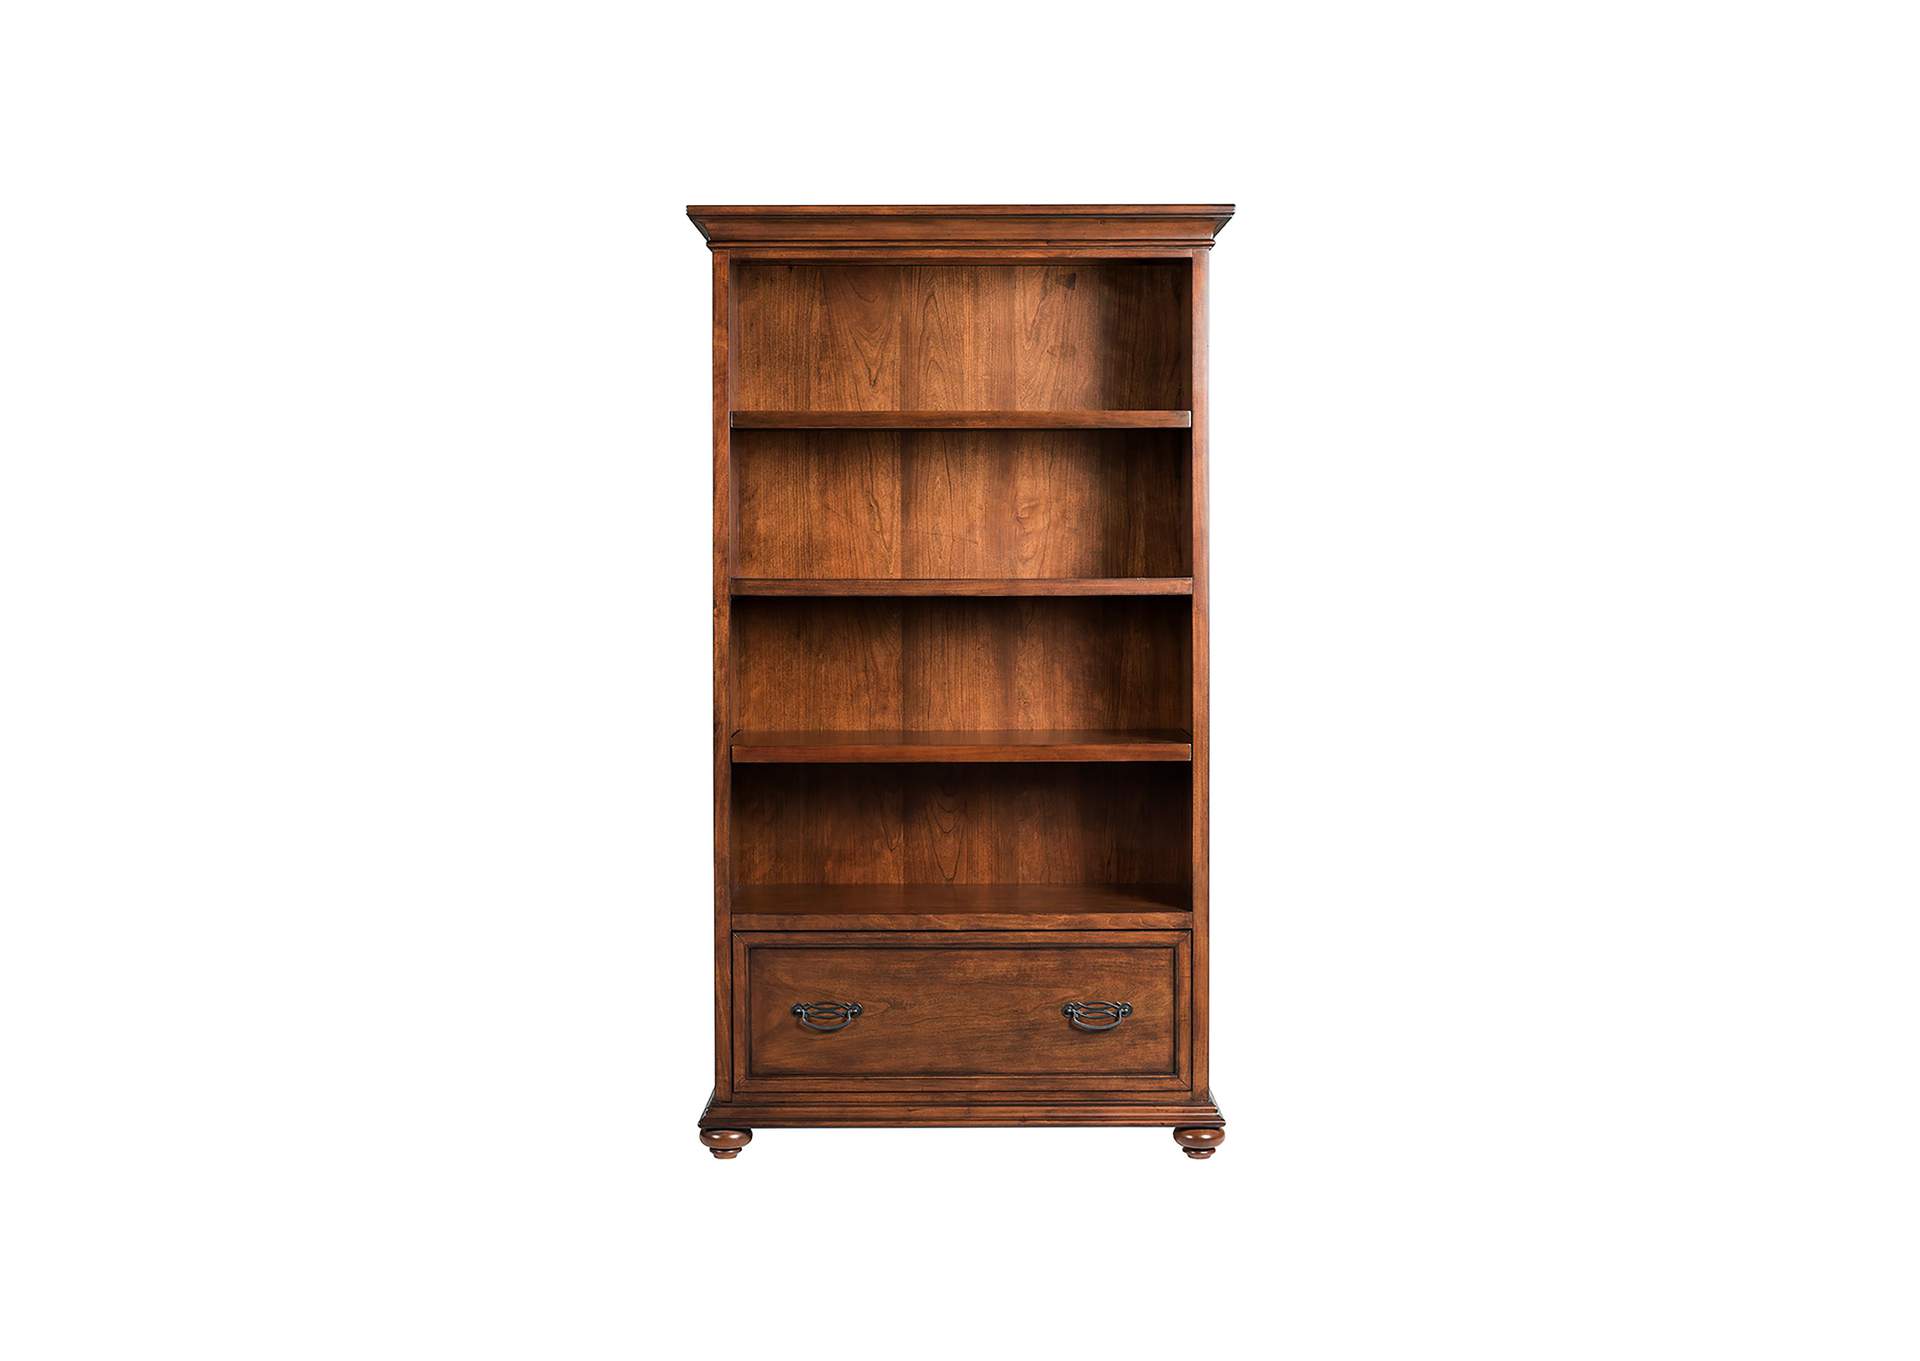 Clinton Hill Classic Cherry Drawer Bookcase,Riverside